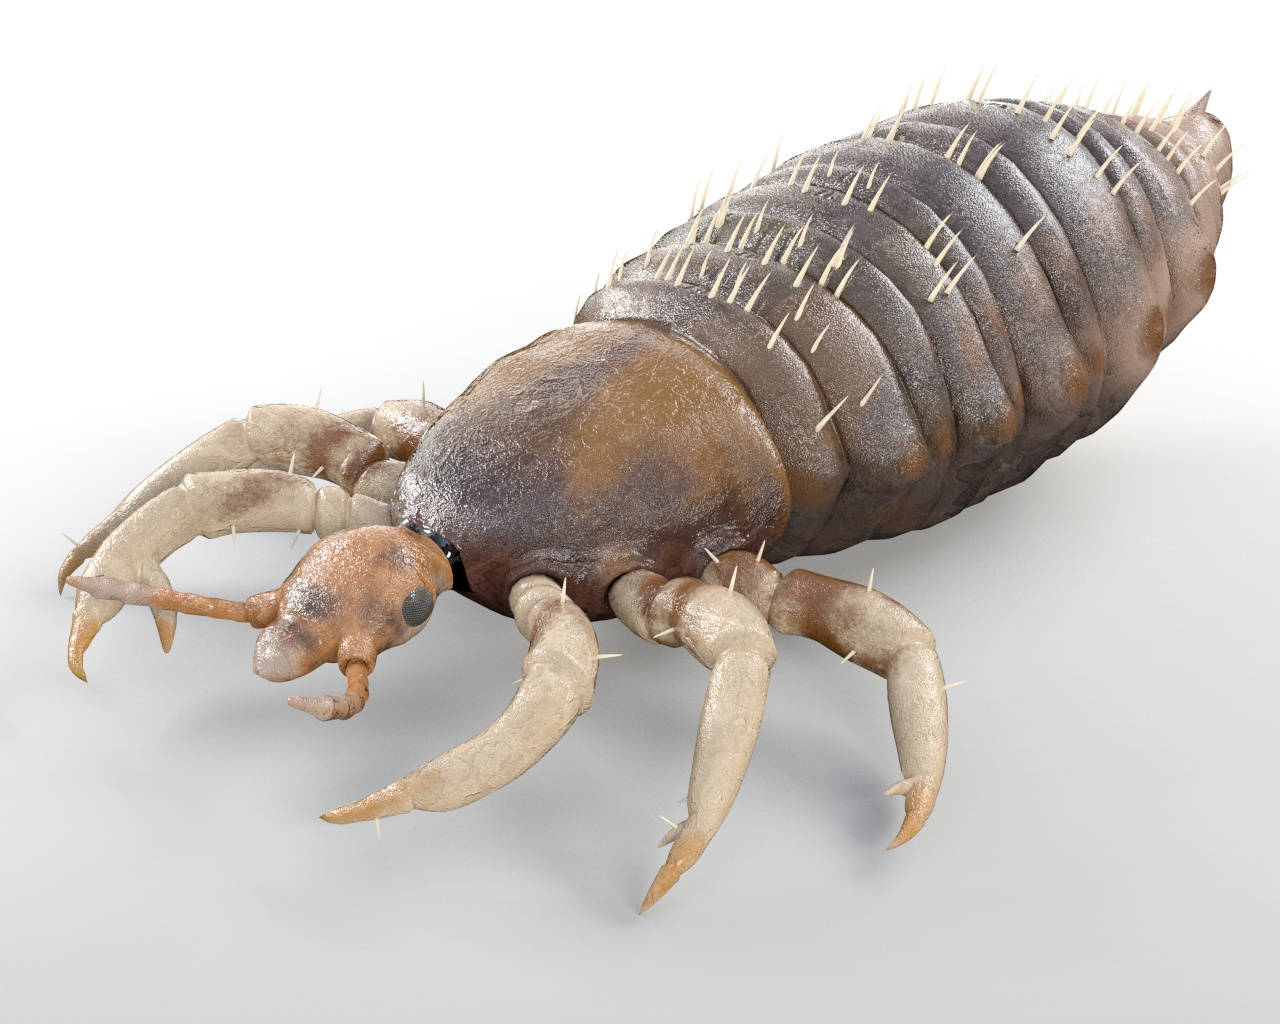 3D Magnified Image of Body Louse Wallpaper